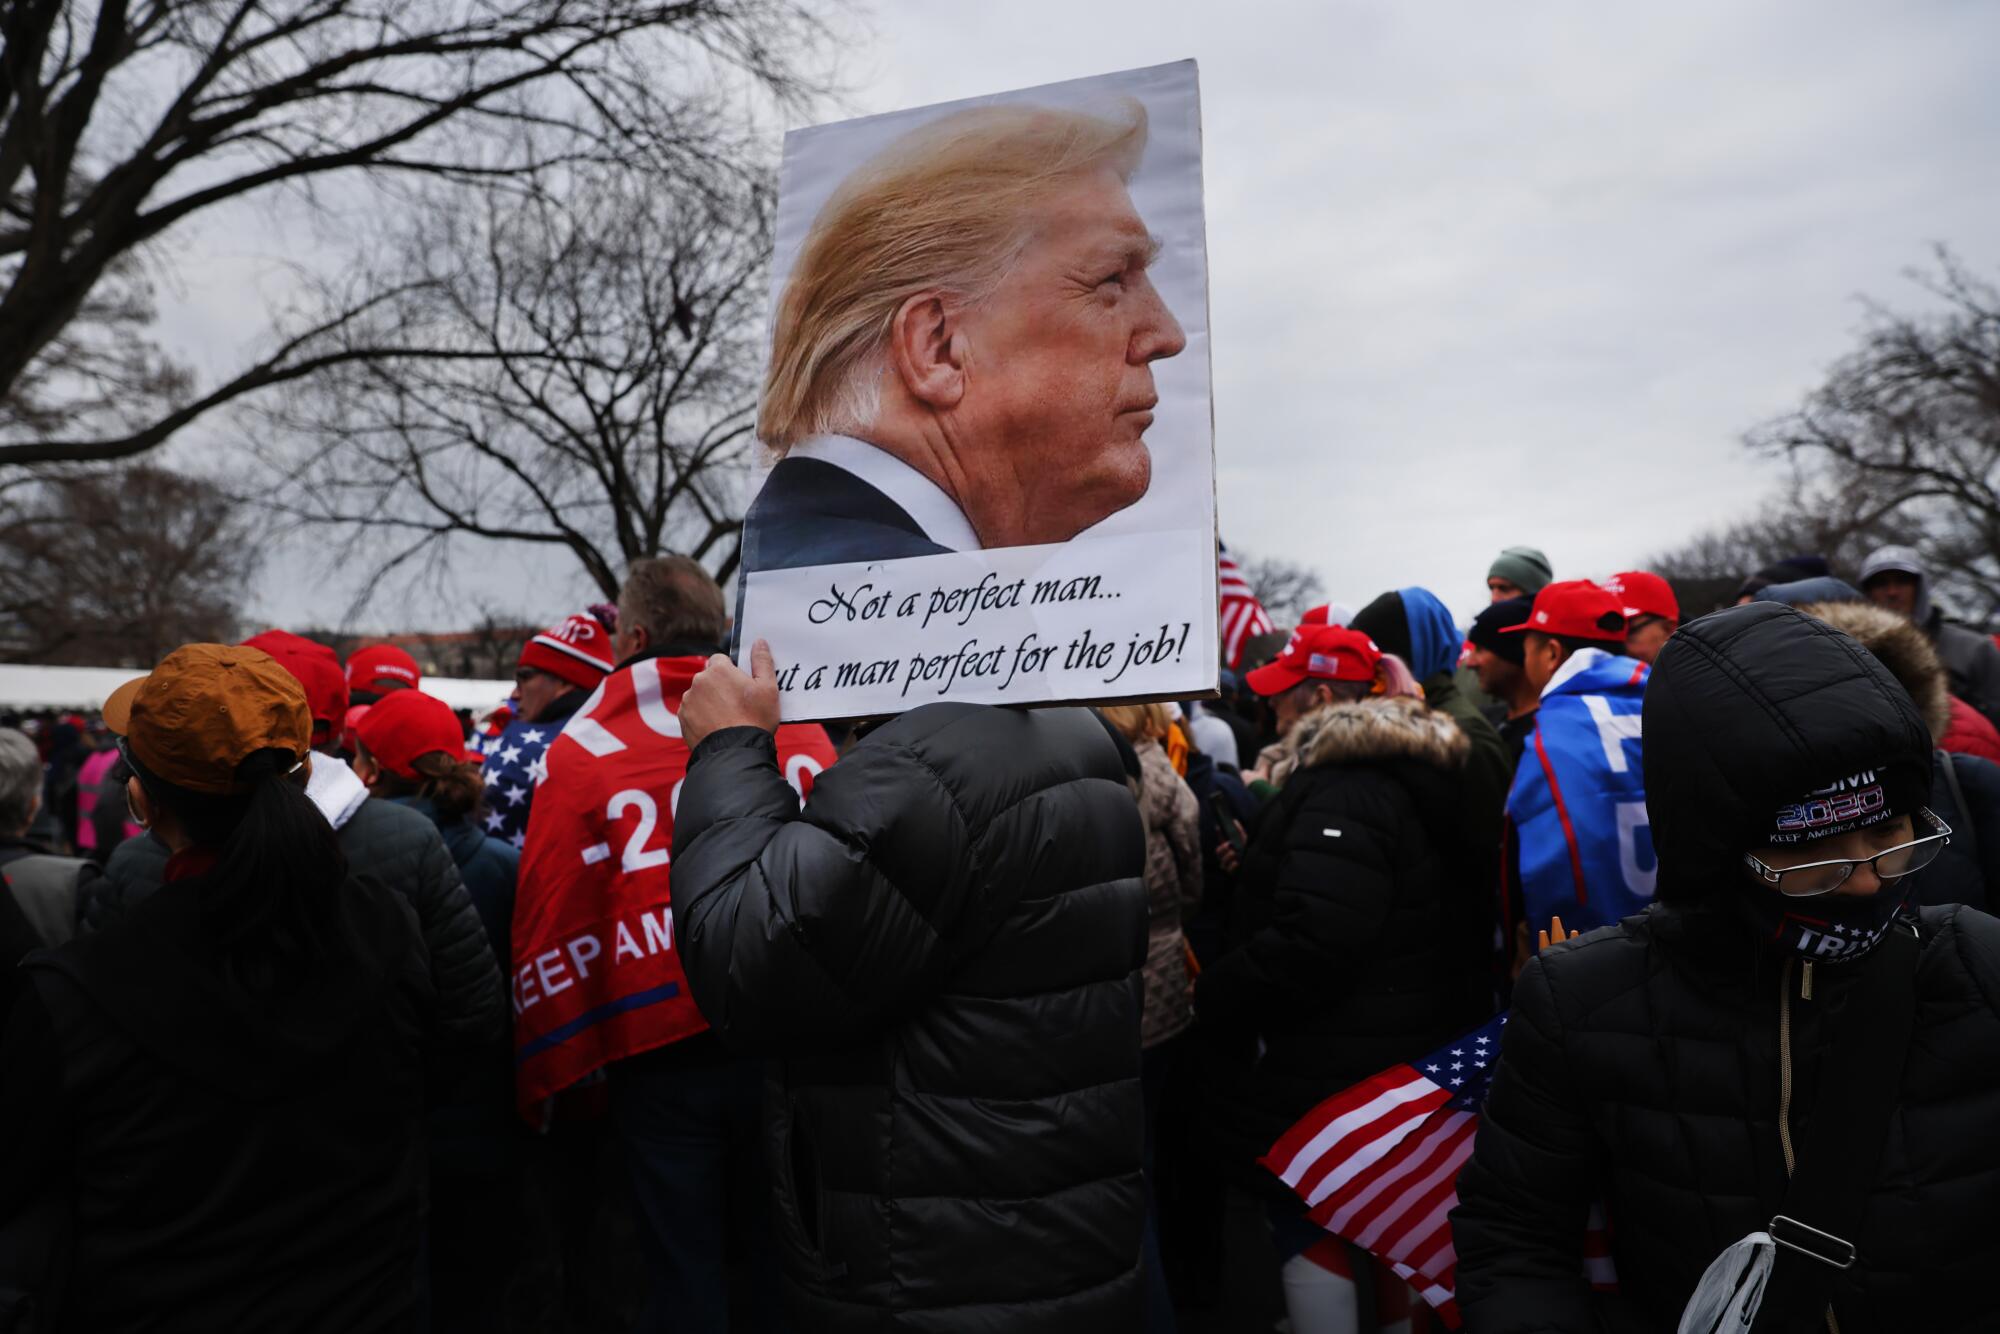 A Trump supporter carries a picture of him reading "Not a perfect man, but a man perfect for the job."